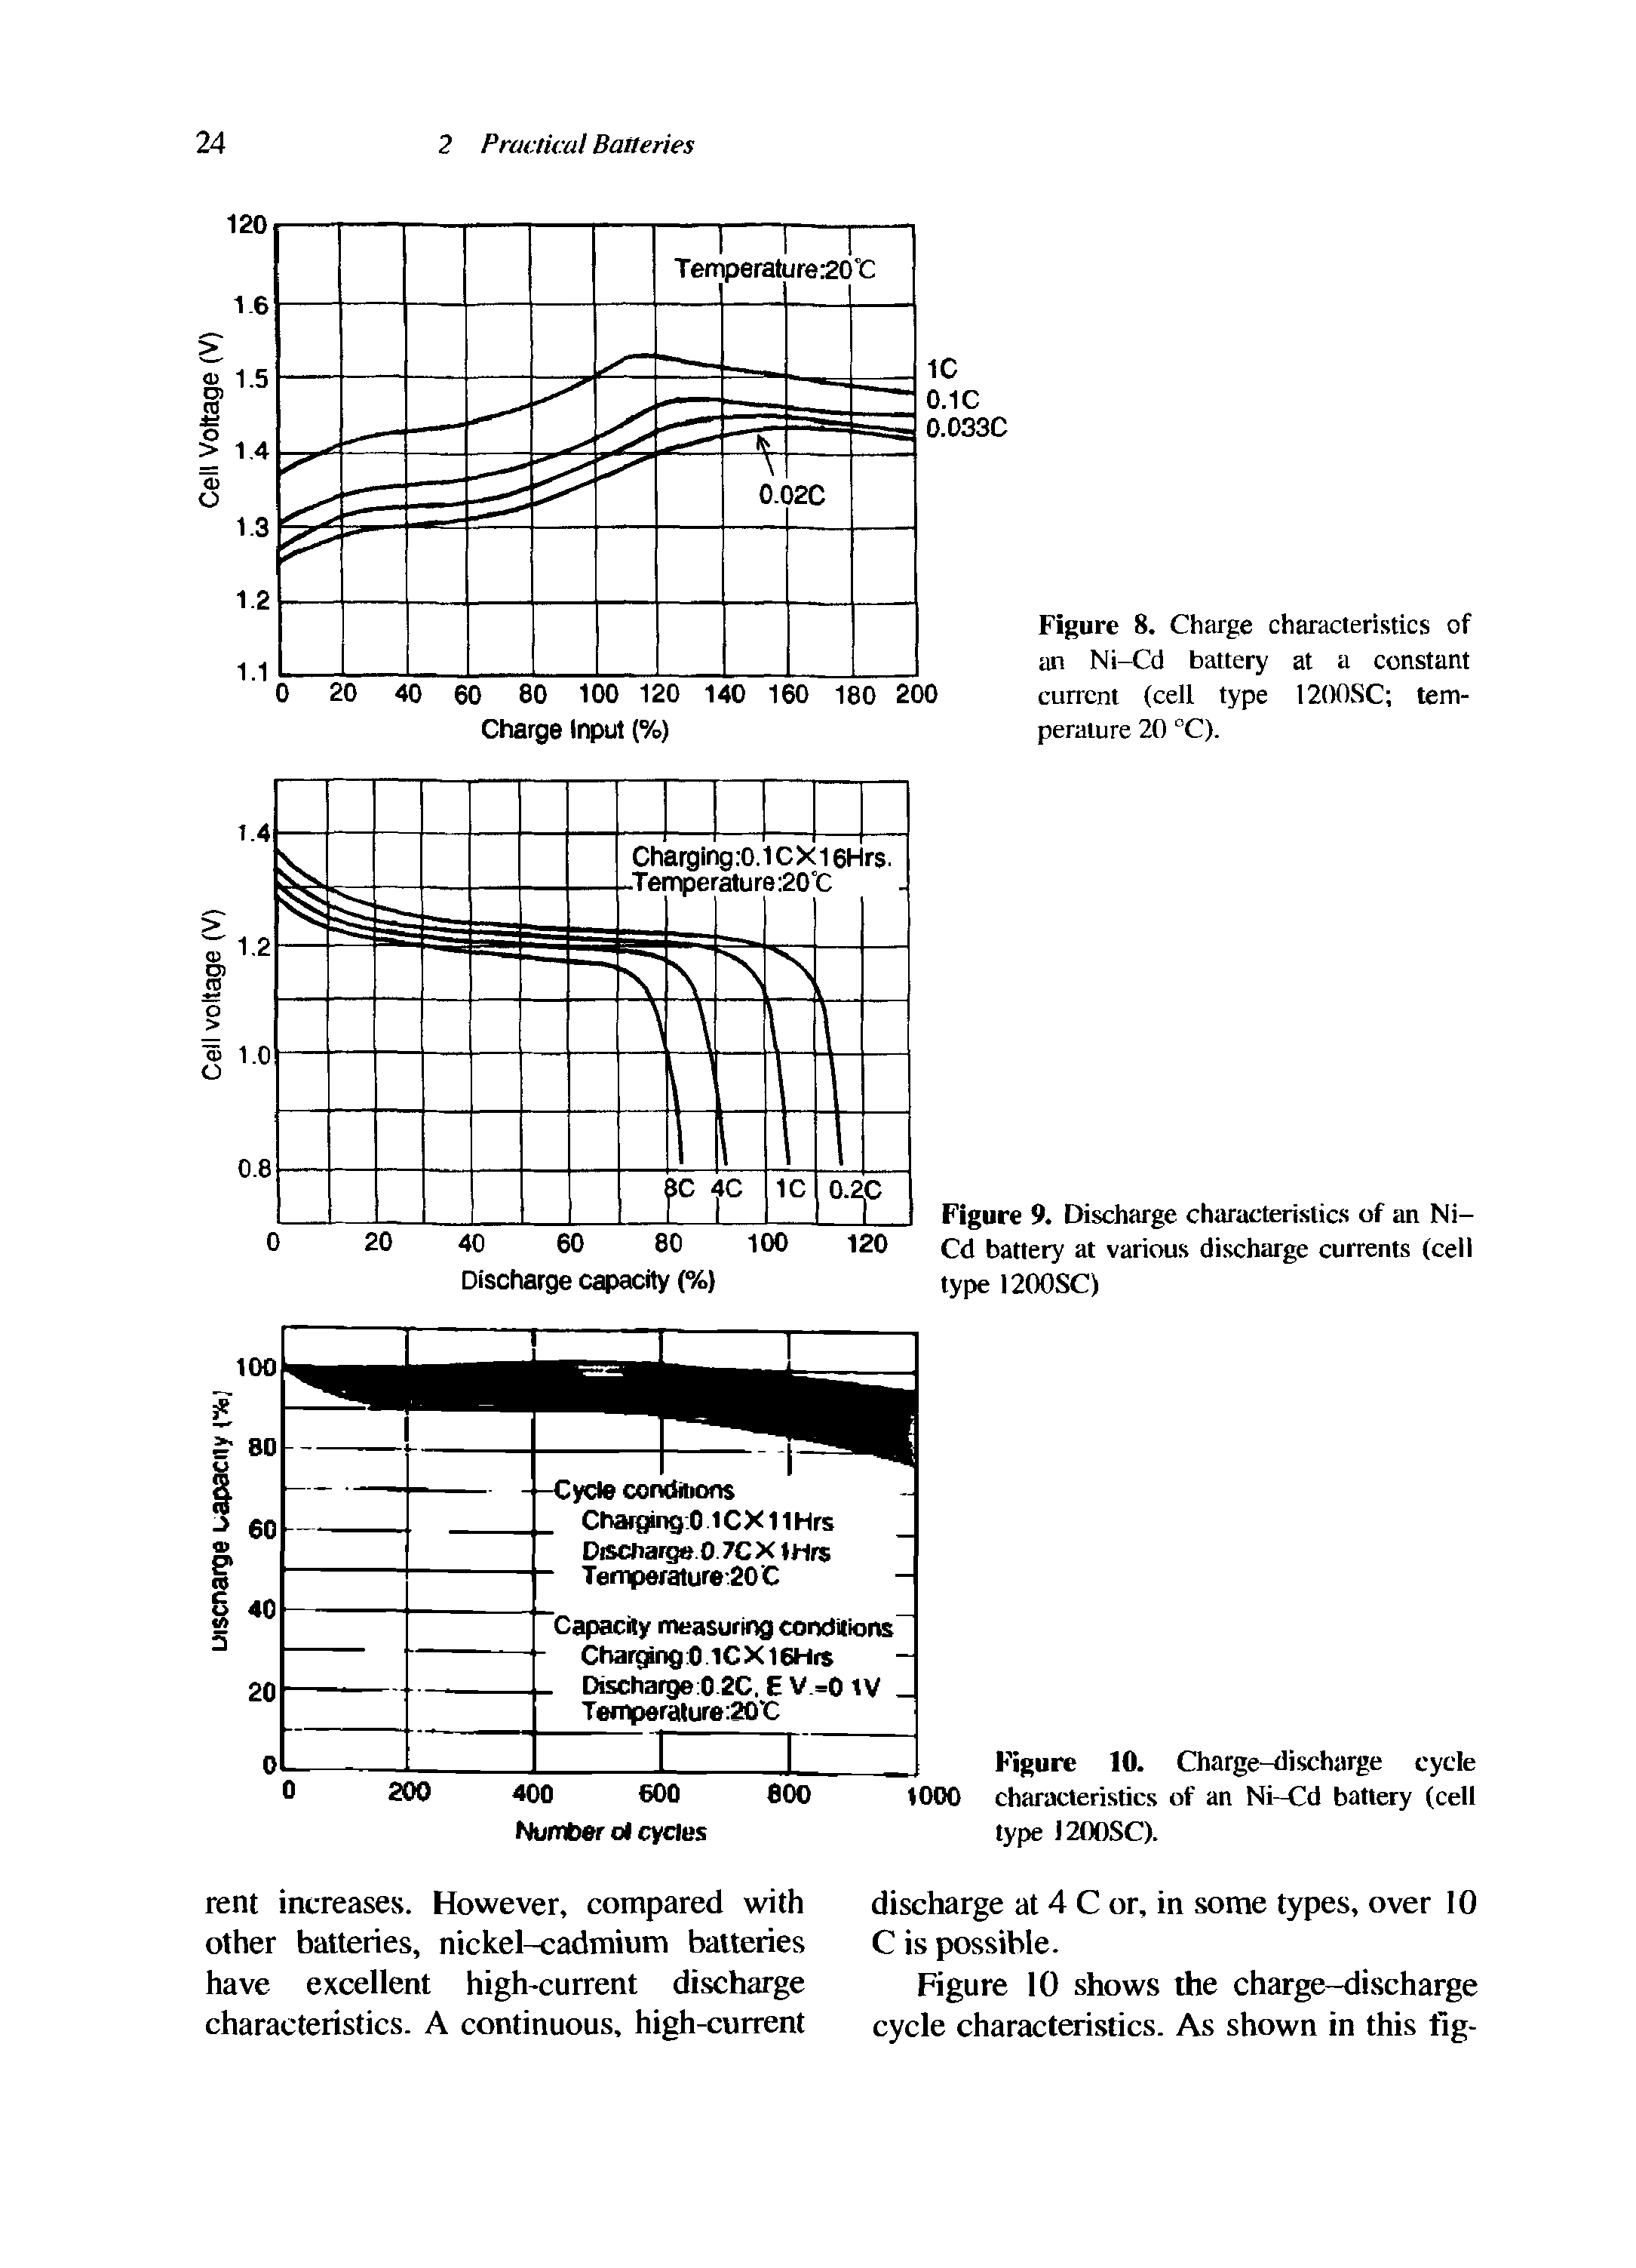 Figure 9. Discharge characteristics of an Ni-Cd battery at various discharge currents (cell type 1200SC)...